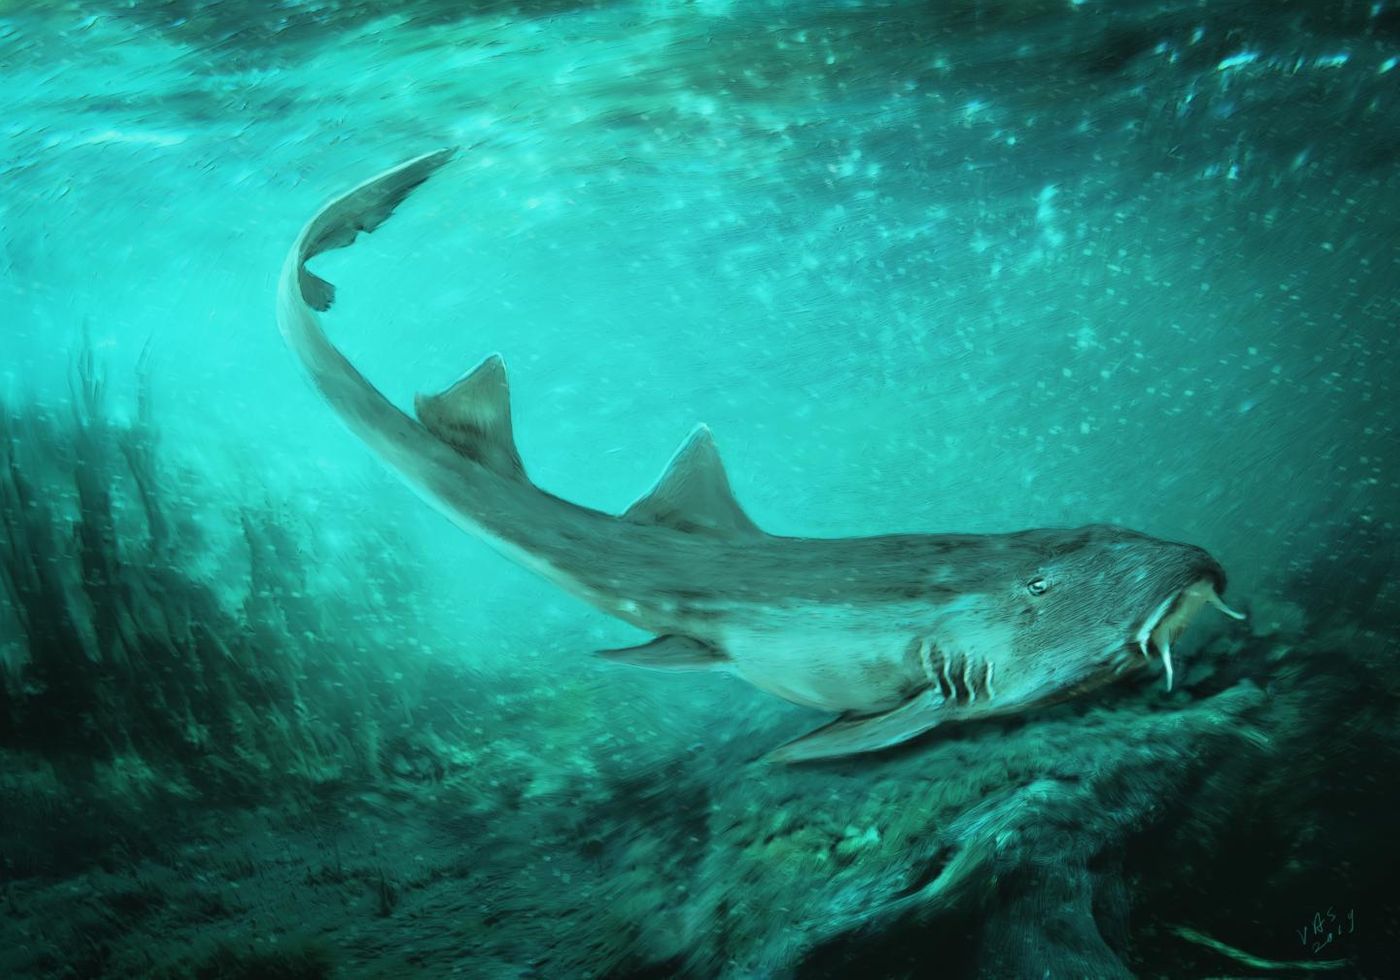 An artist's impression of Galagadon, a newly-discovered shark species that existed with T. Rex.